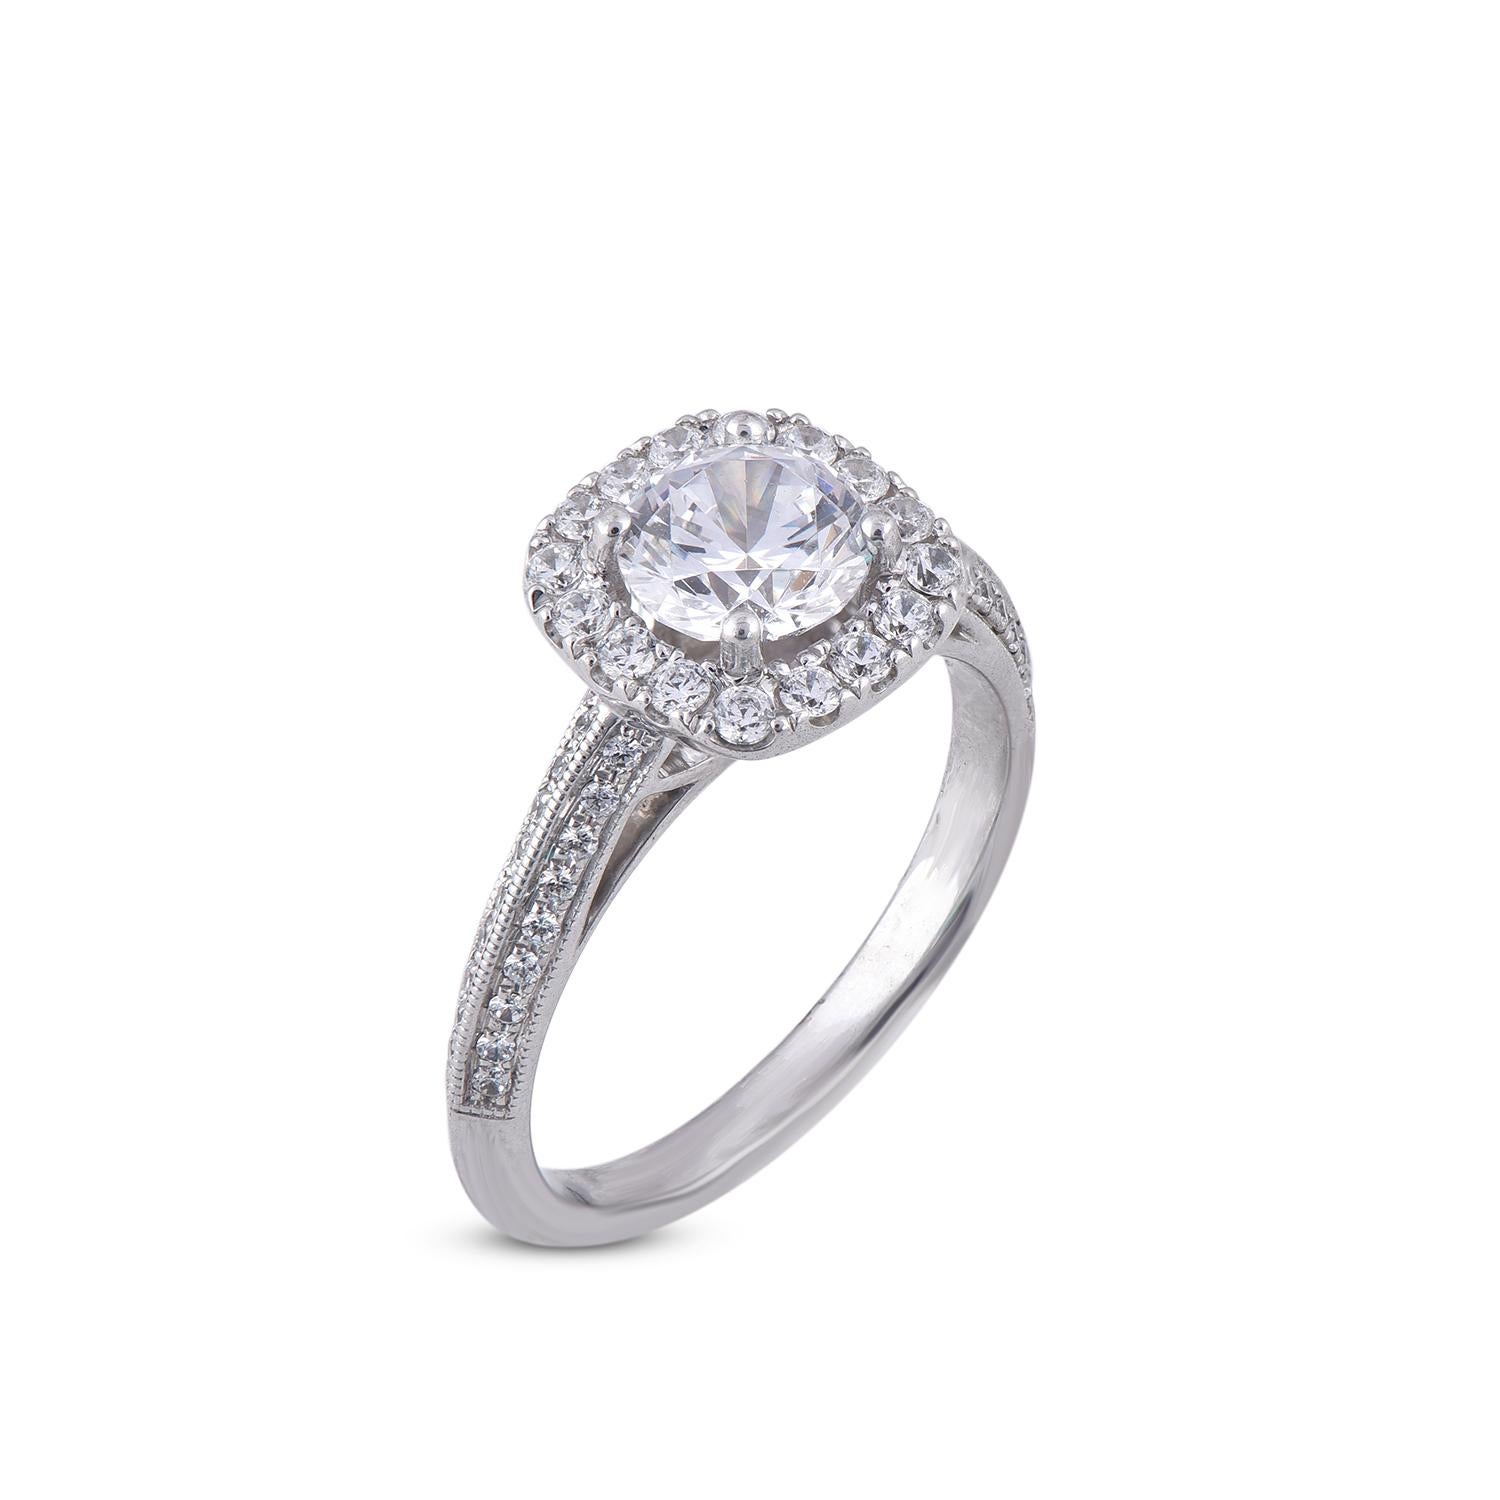 This Cushion shape Halo engagement Ring is expertly crafted in 18 Karat White Gold and features 1.00 ct centre stone and 0.50 ct of diamond frame and shank with prong setting. The diamonds are natural, not treated and dazzles in G-H color SI1-2